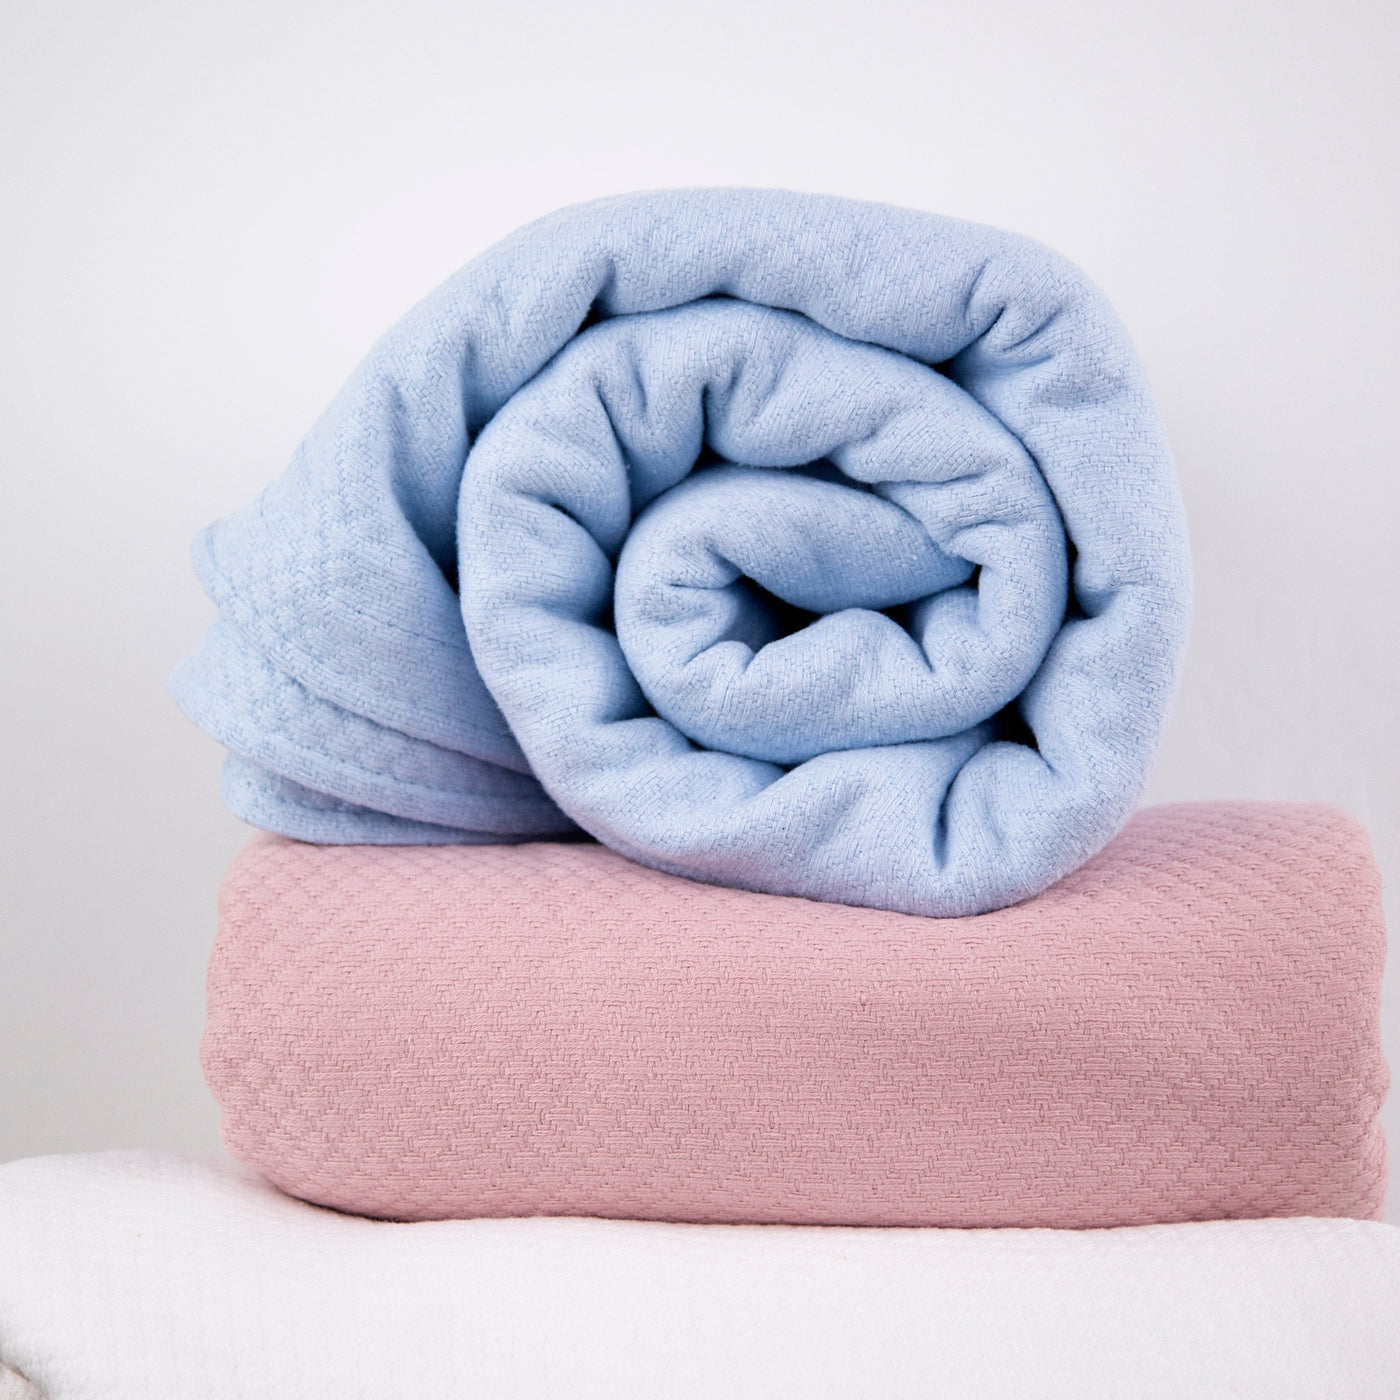 Milton Cotton Blankets and Throws in Pink and Blue Stack Together#color_all